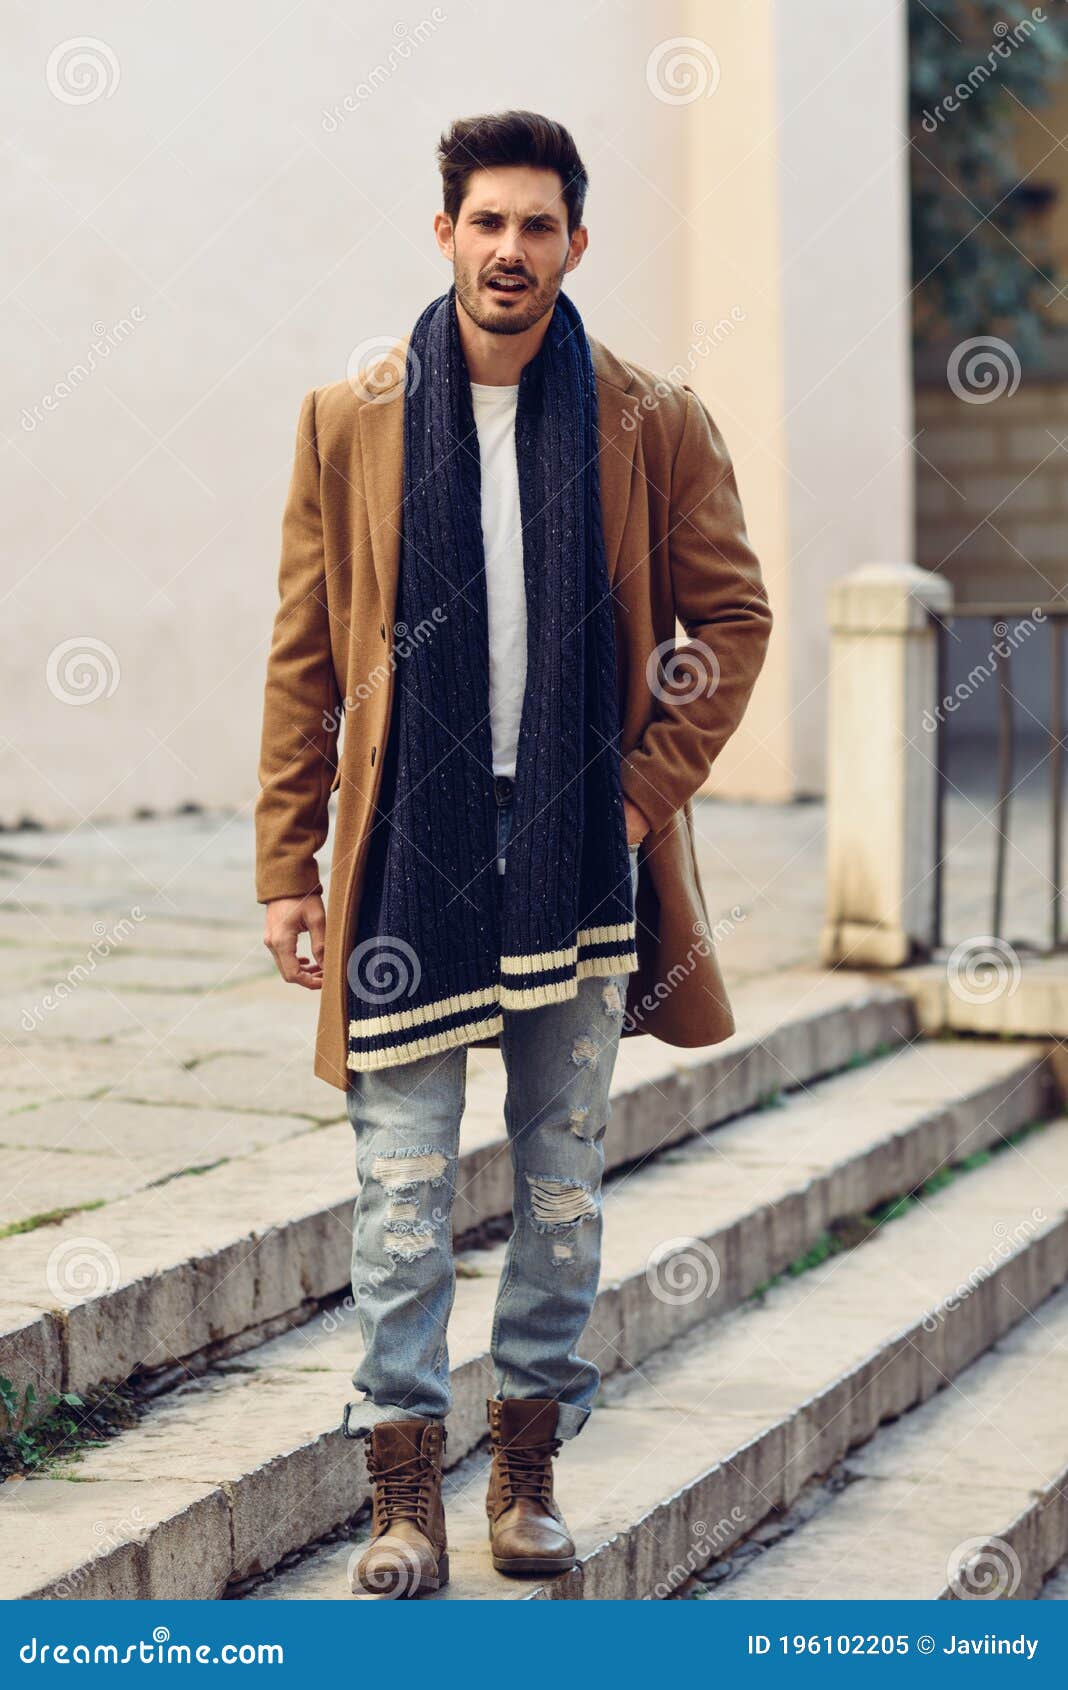 Young Man Wearing Winter Clothes in the Street. Stock Image - Image of ...